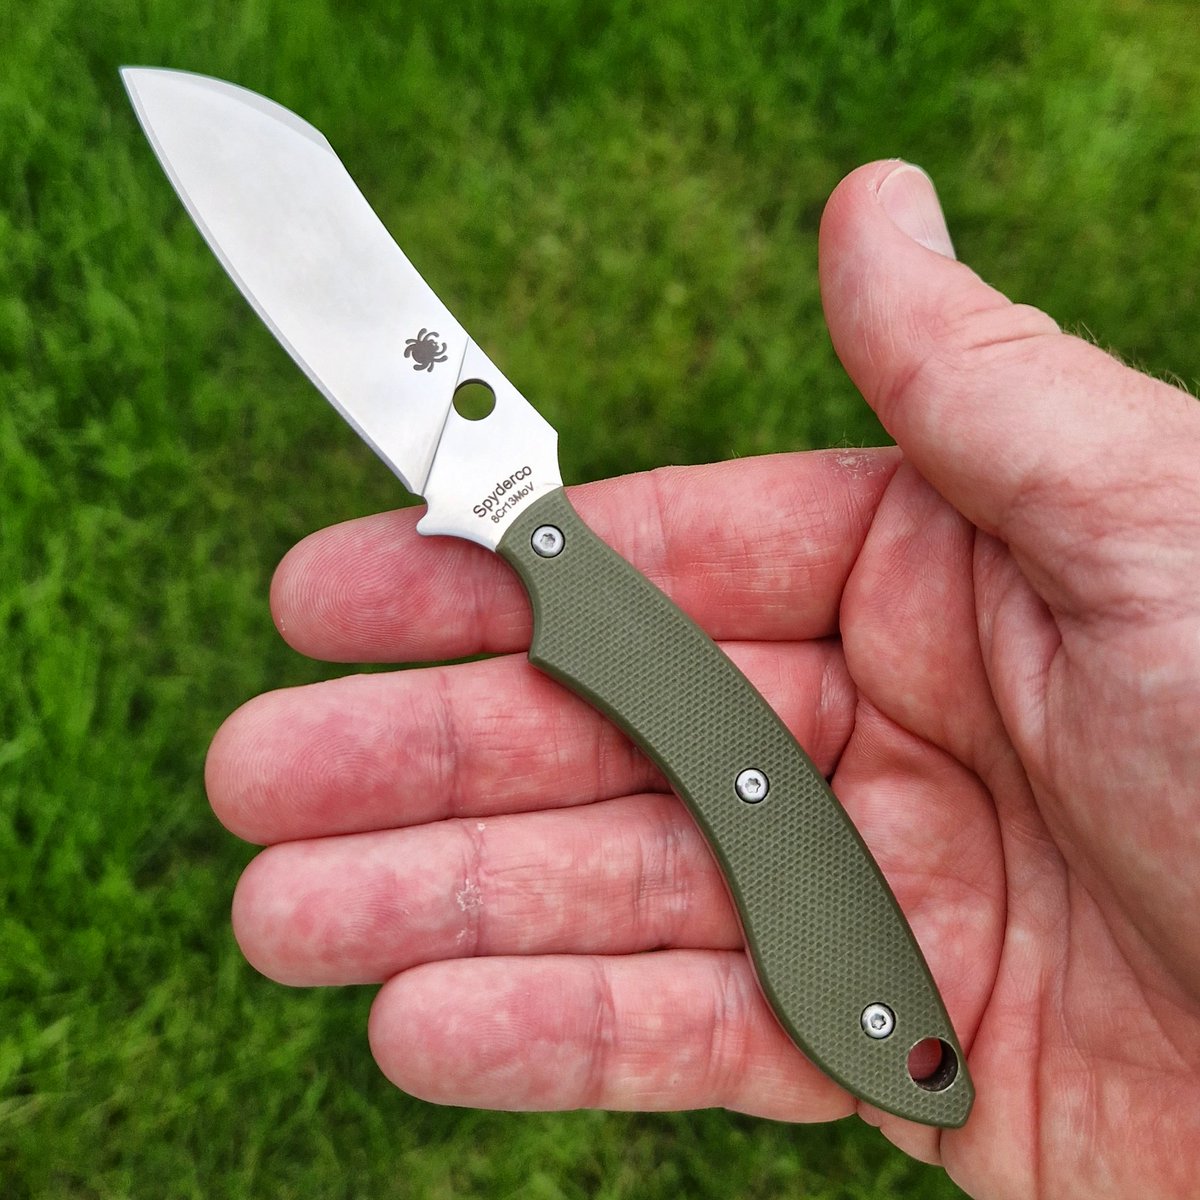 I simply had to get a #spyderco #stok. Not only is it a great little fixed blade, but it's also designed by a great guy!